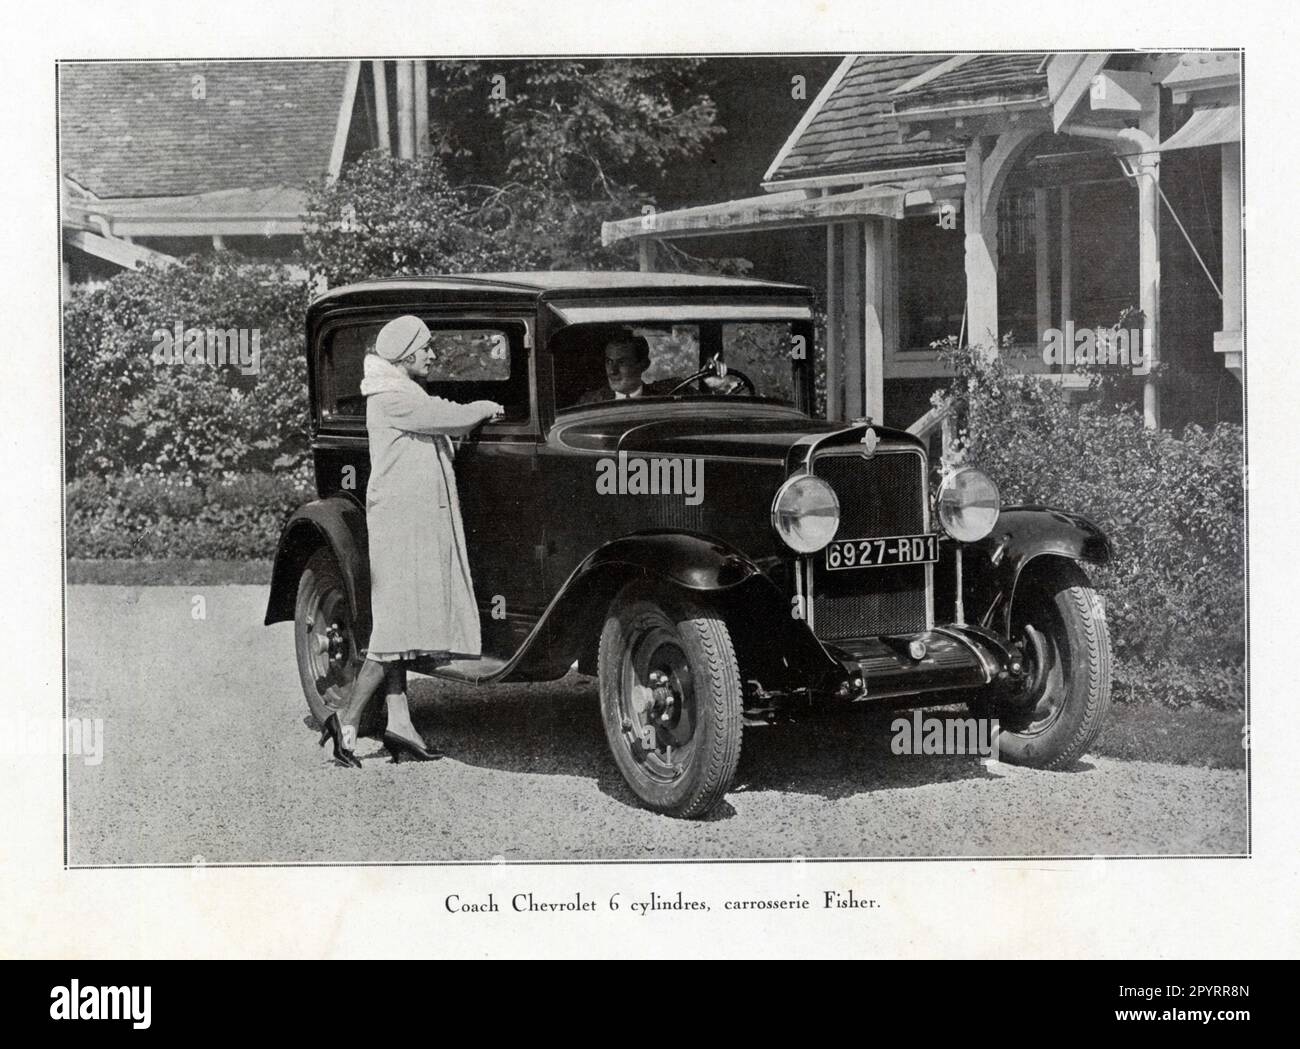 Coach Chevrolet 6 cylindres , carrosserie Fisher, 1929 Foto Stock